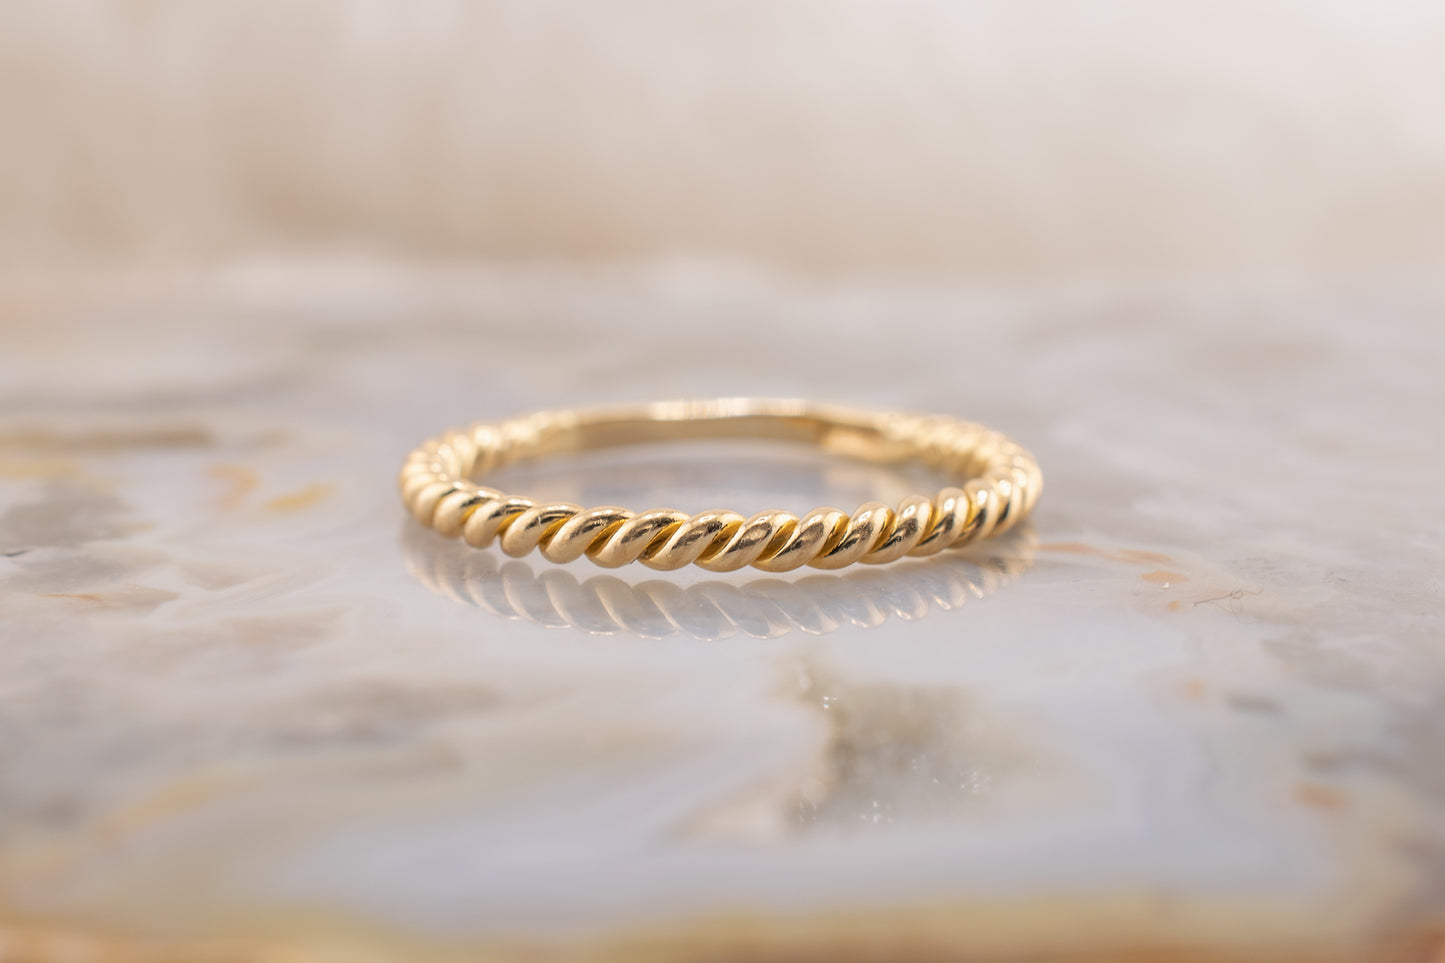 Circa early 2000s Vintage Estate Solid 18 Karat Yellow Gold Minimalist Rope Design Band, Stackable Band, 2mm Size 8.75